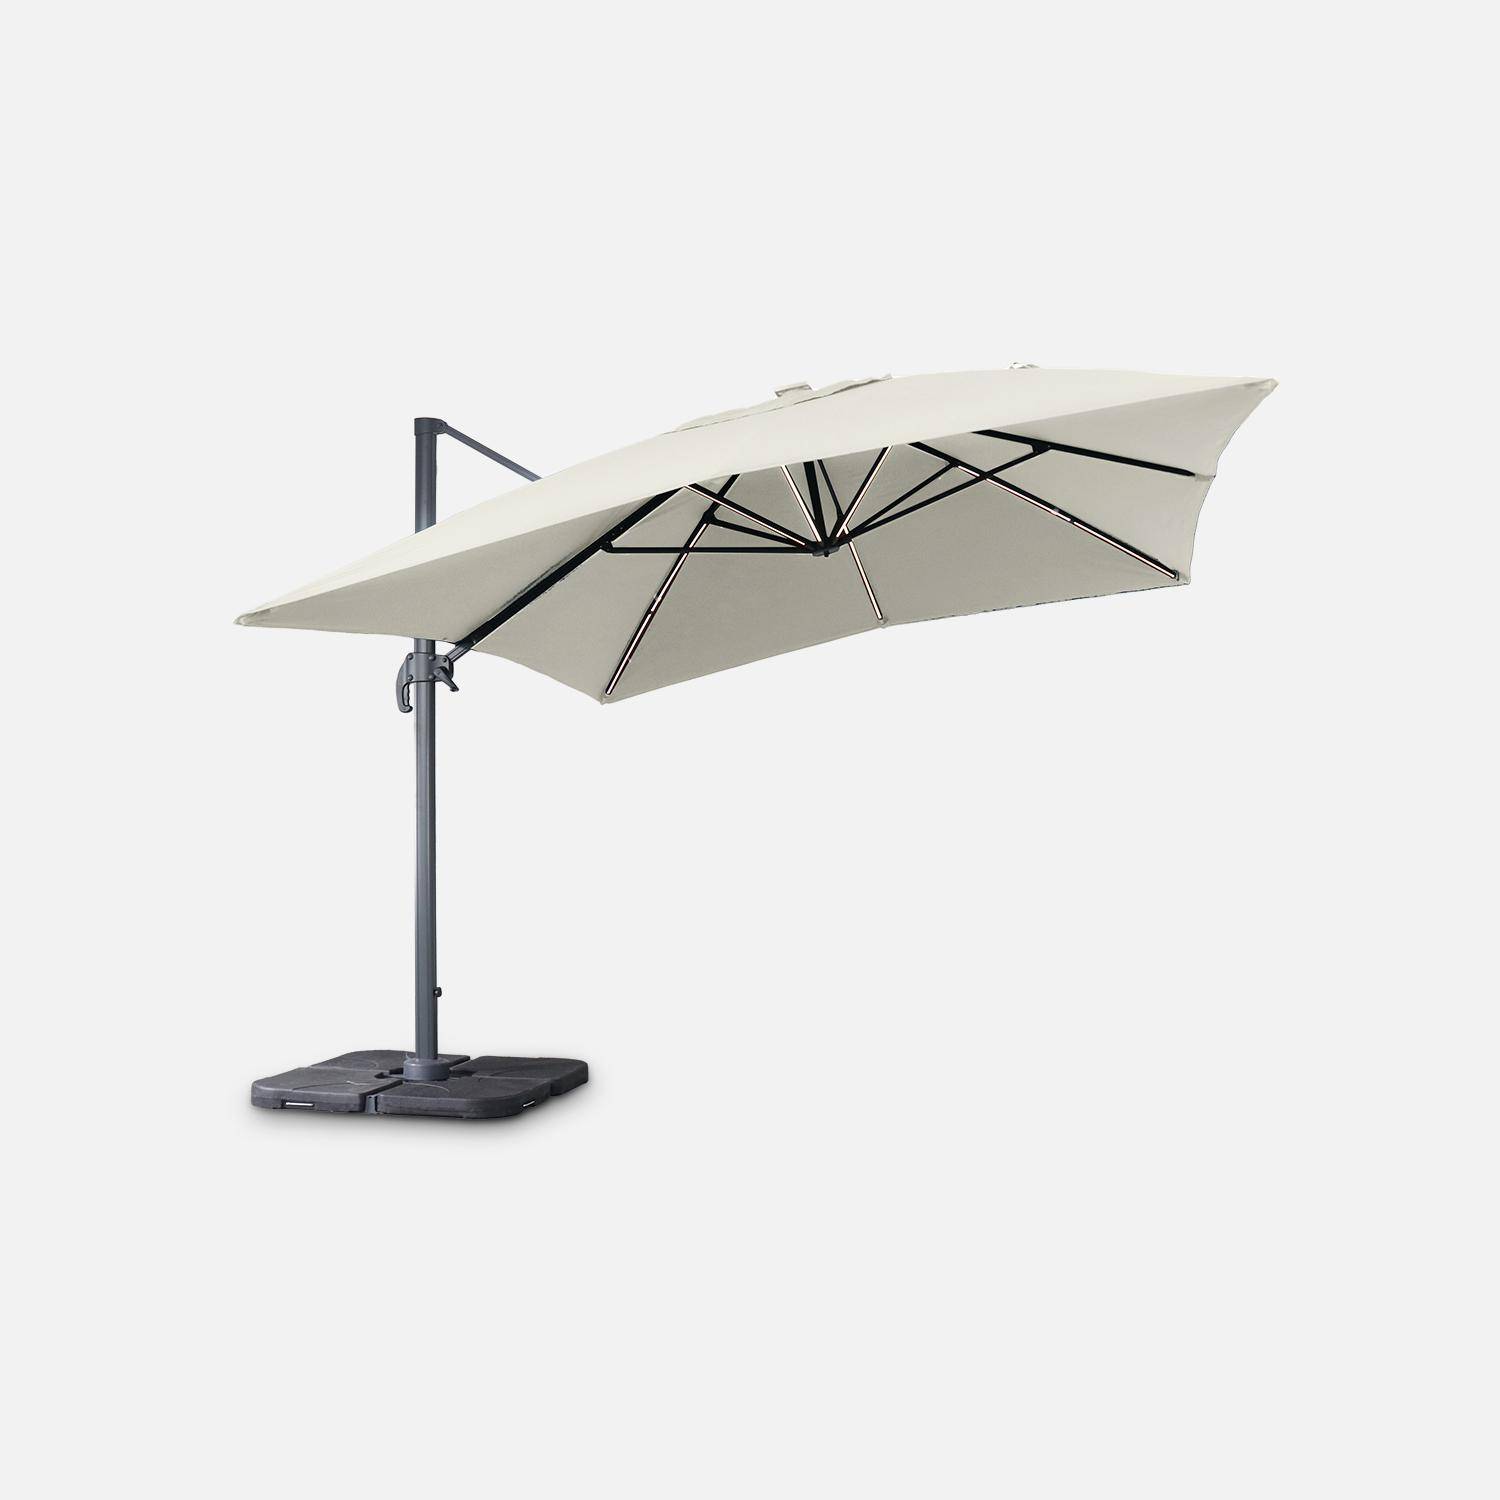 Premium quality rectangular 3x4m cantilever parasol with solar-powered integrated LED lights - Cantilever parasol, tiltable, foldable with 360° rotation, solar charging, cover included - Luce - Beige,sweeek,Photo2